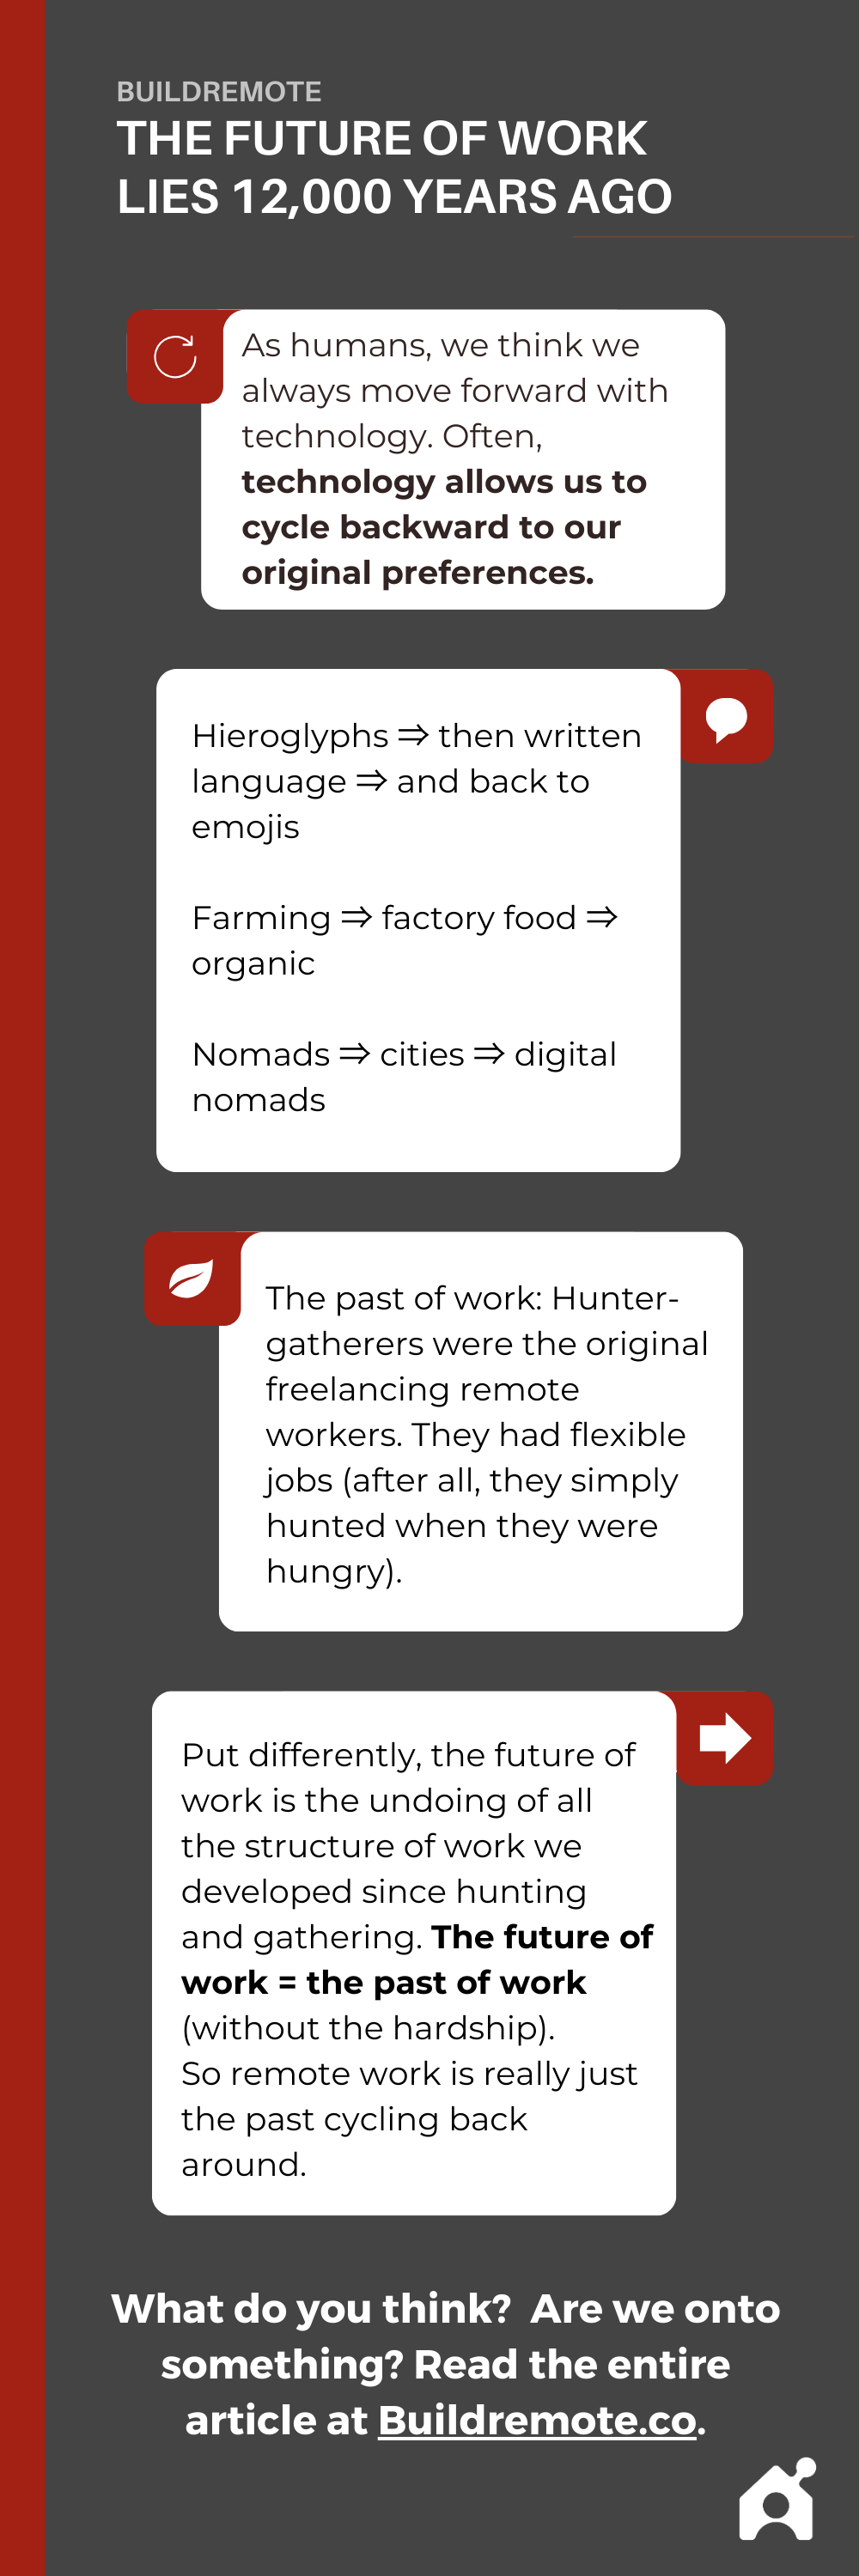 Pinterest Image - The Future Of Work Lies 12,000 Years Ago